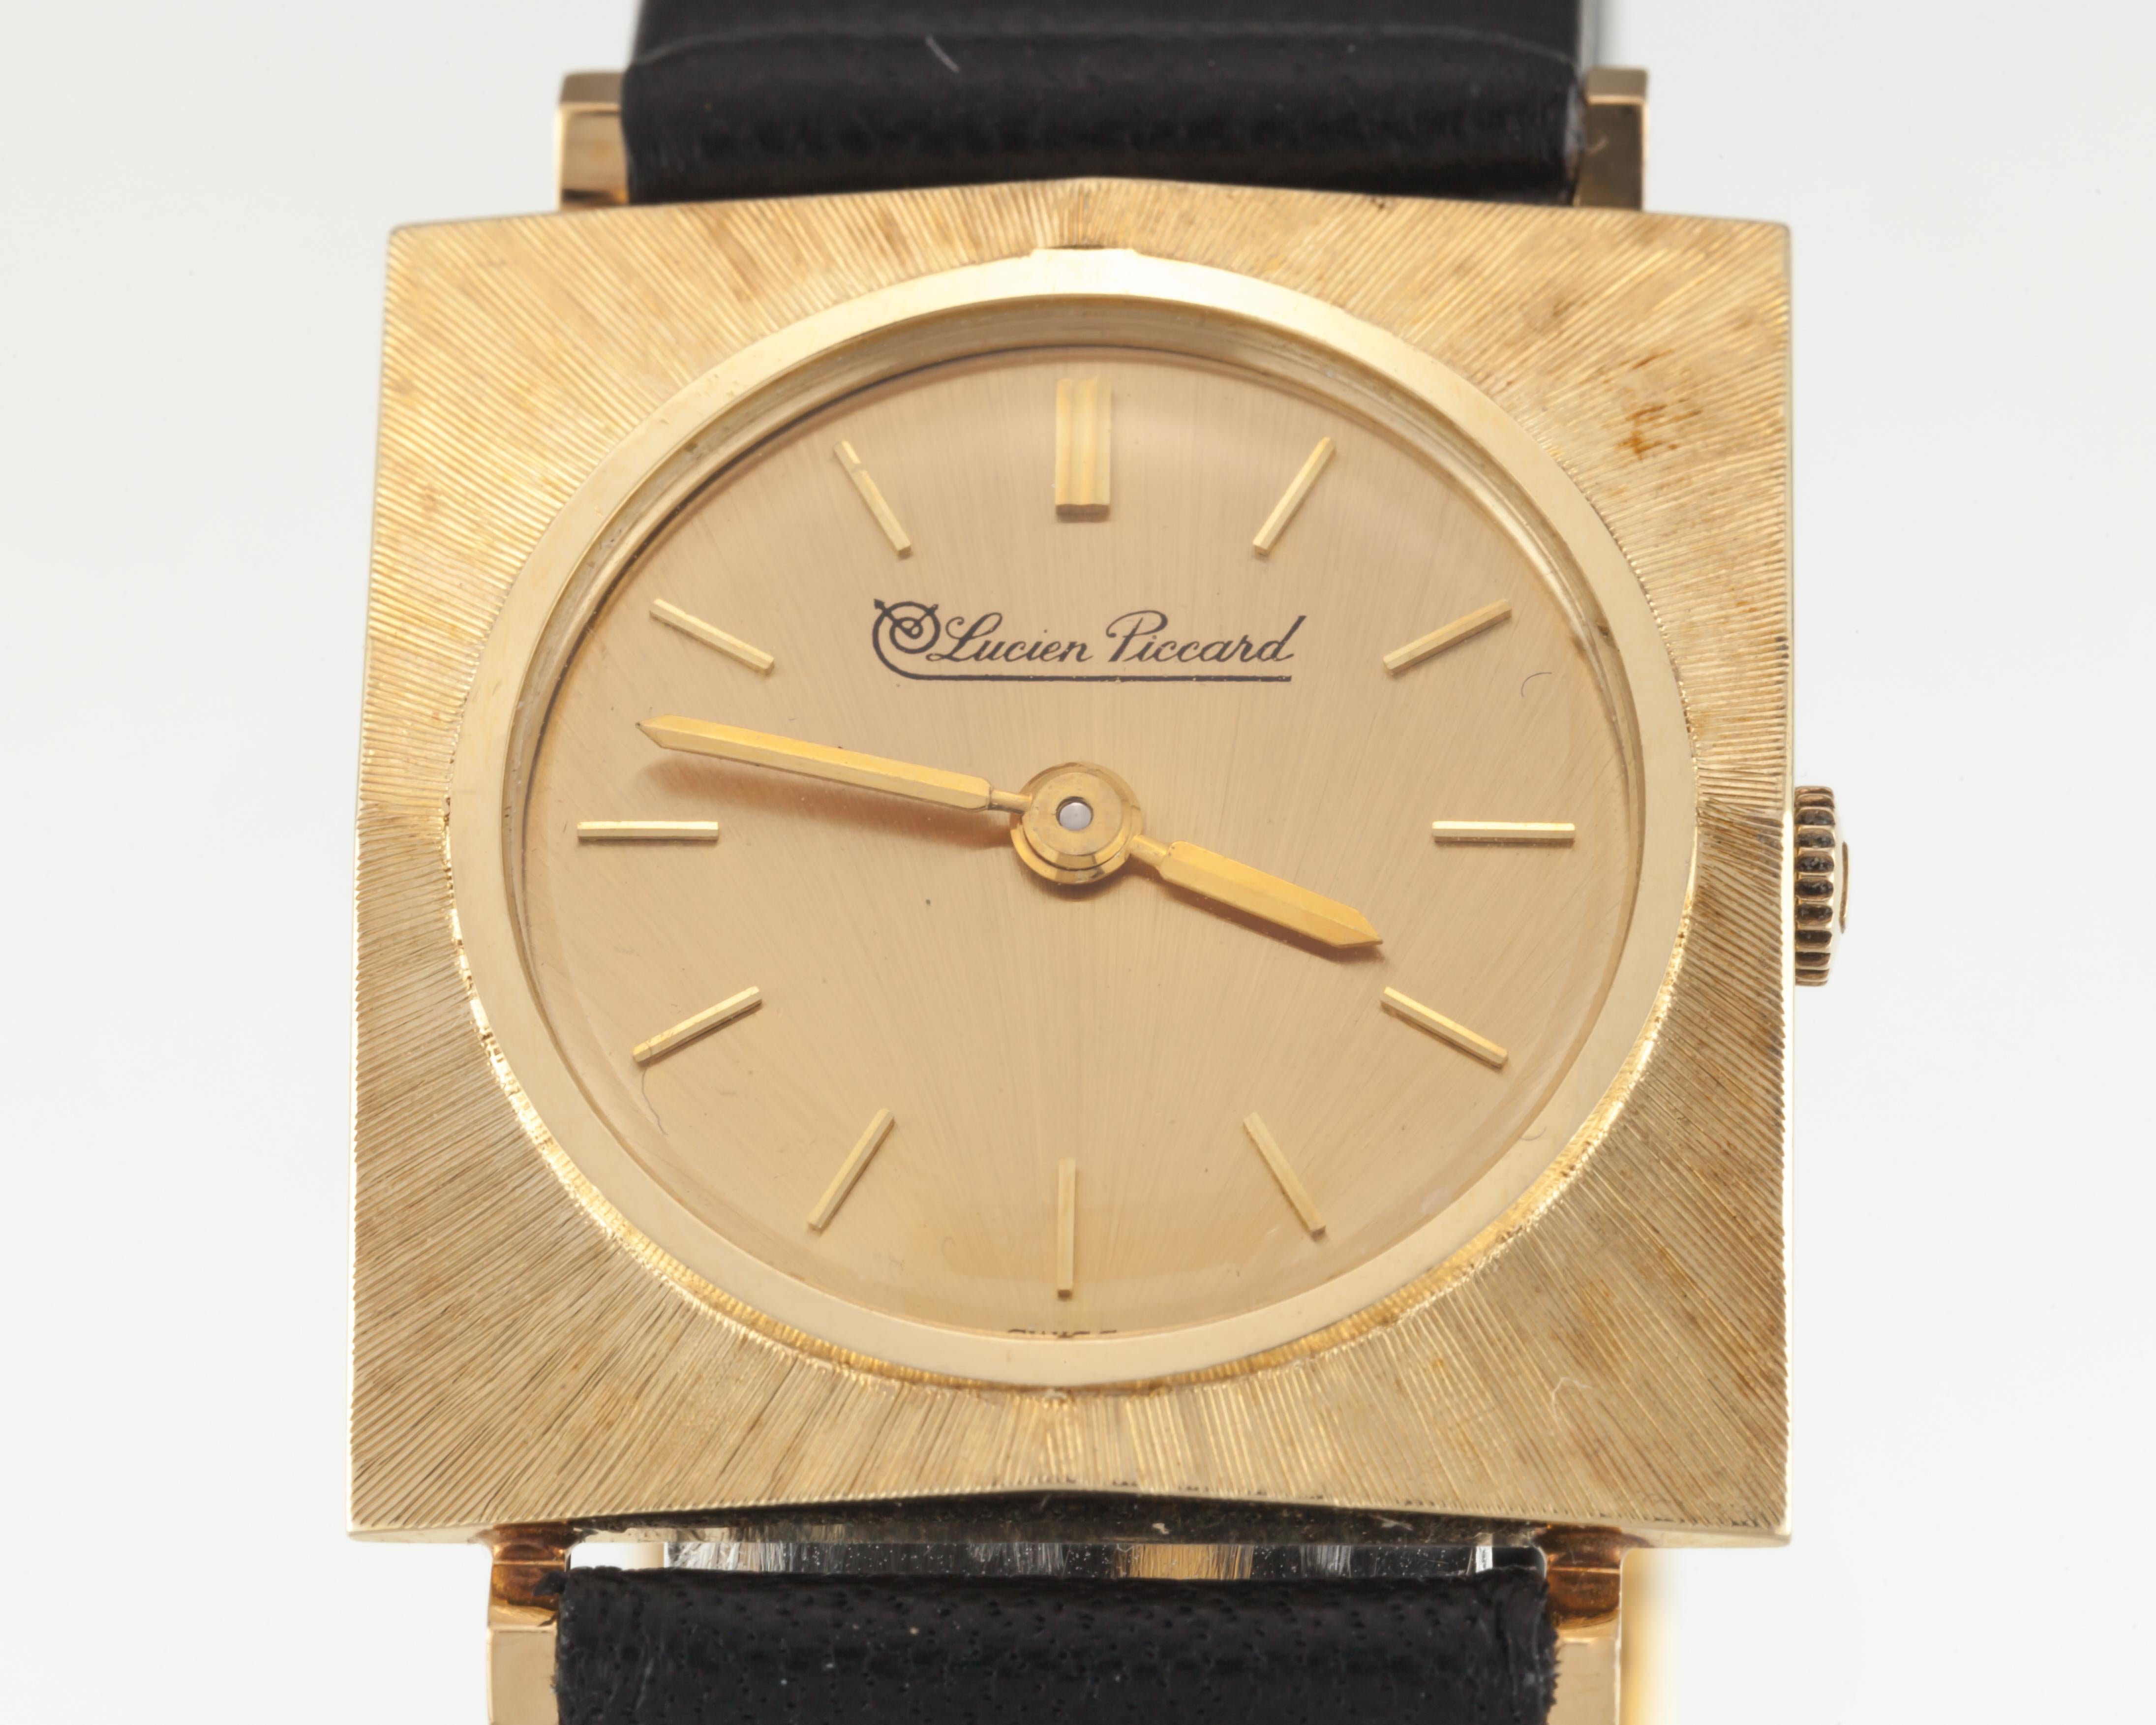 Lucien Piccard 14k Yellow Gold Men's Dress Hand-Winding Watch w/ Leather Band
Movement #C18695
Case #36720

14k Yellow Gold Square Case with Radial Brushed Bezel
26 mm Wide (27 mm w/ Crown)
27 mm Long
Lug-to-Lug Width = 17 mm
Lug-to-Lug Distance =